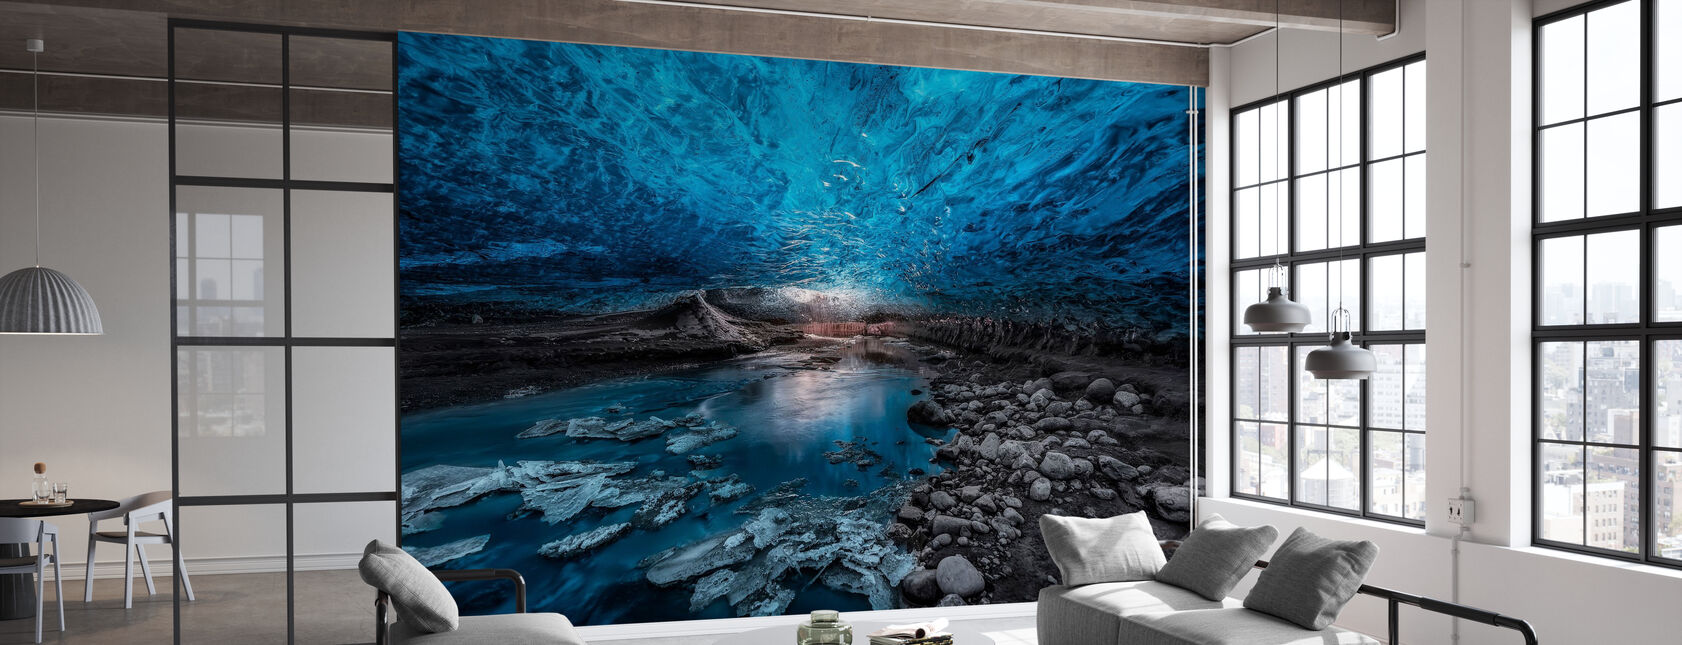 Ice Cave - Wallpaper - Office